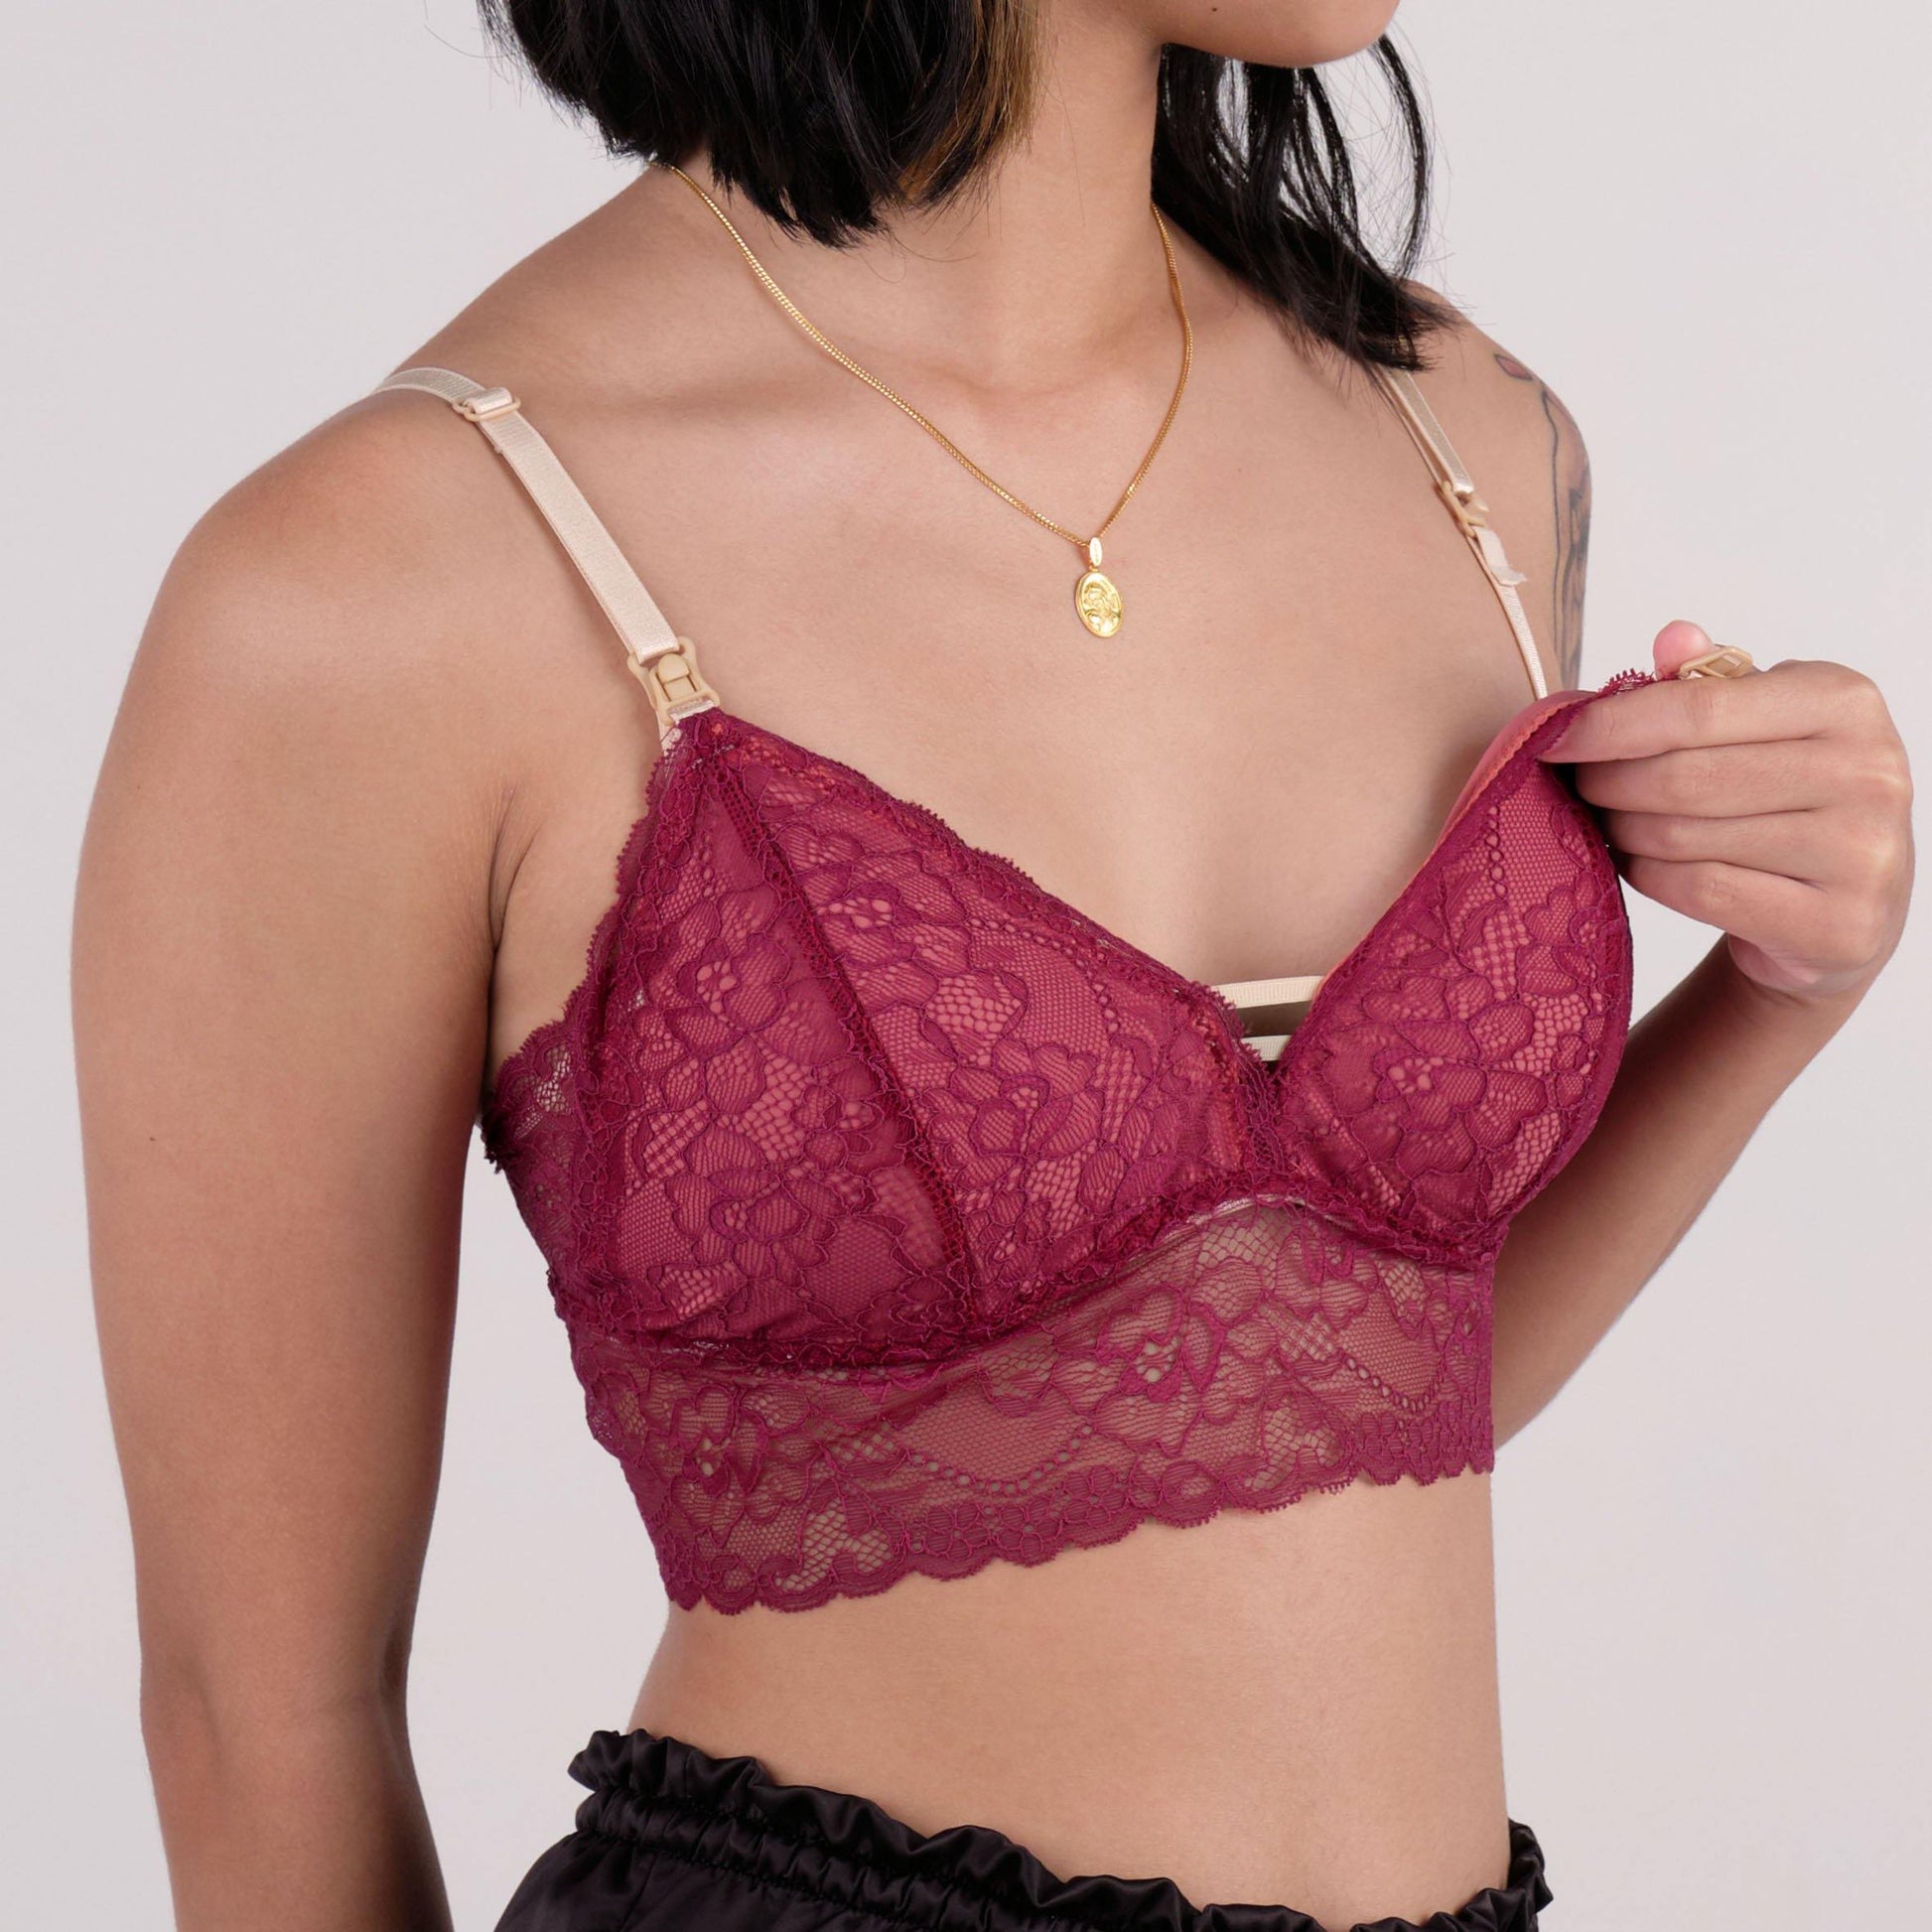 nursing - the best wishes padded bralette in pomegranate - Our Bralette Club